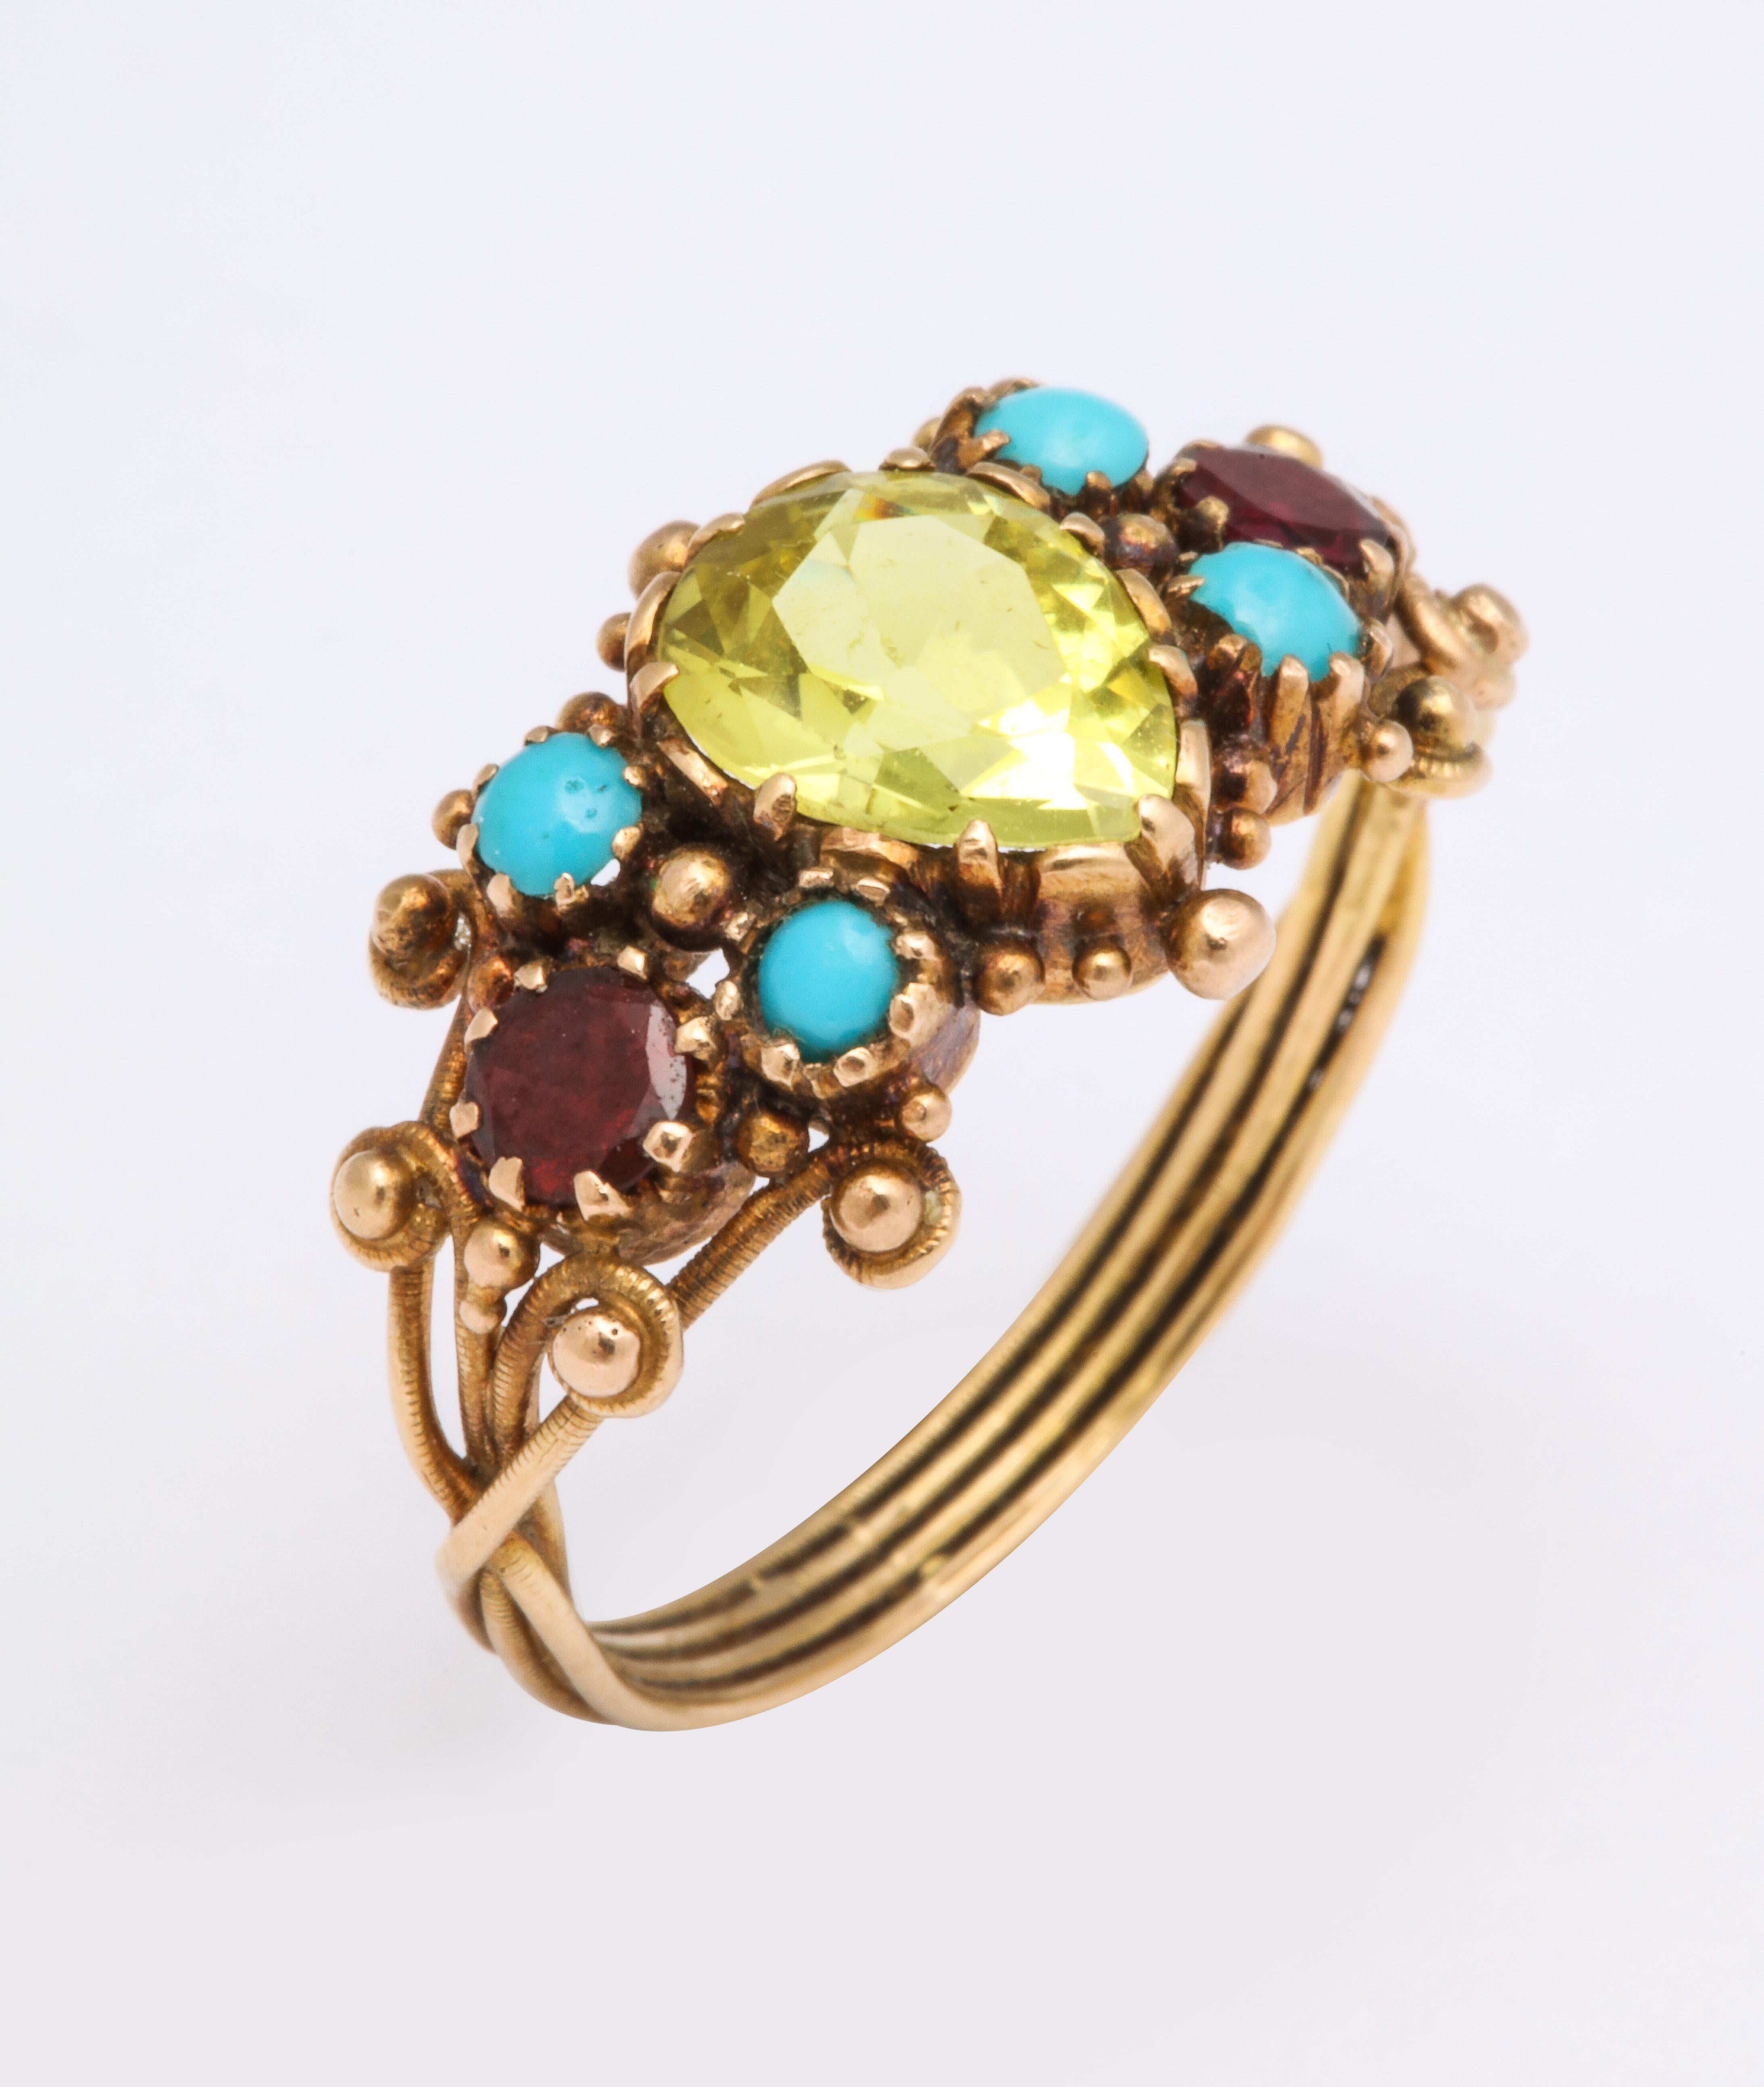 Made circa 1820, this lovely English ring is set with a central chrysoberyl surrounded by four turquoise and two oval almandine garnets. All set in 22k gold. 